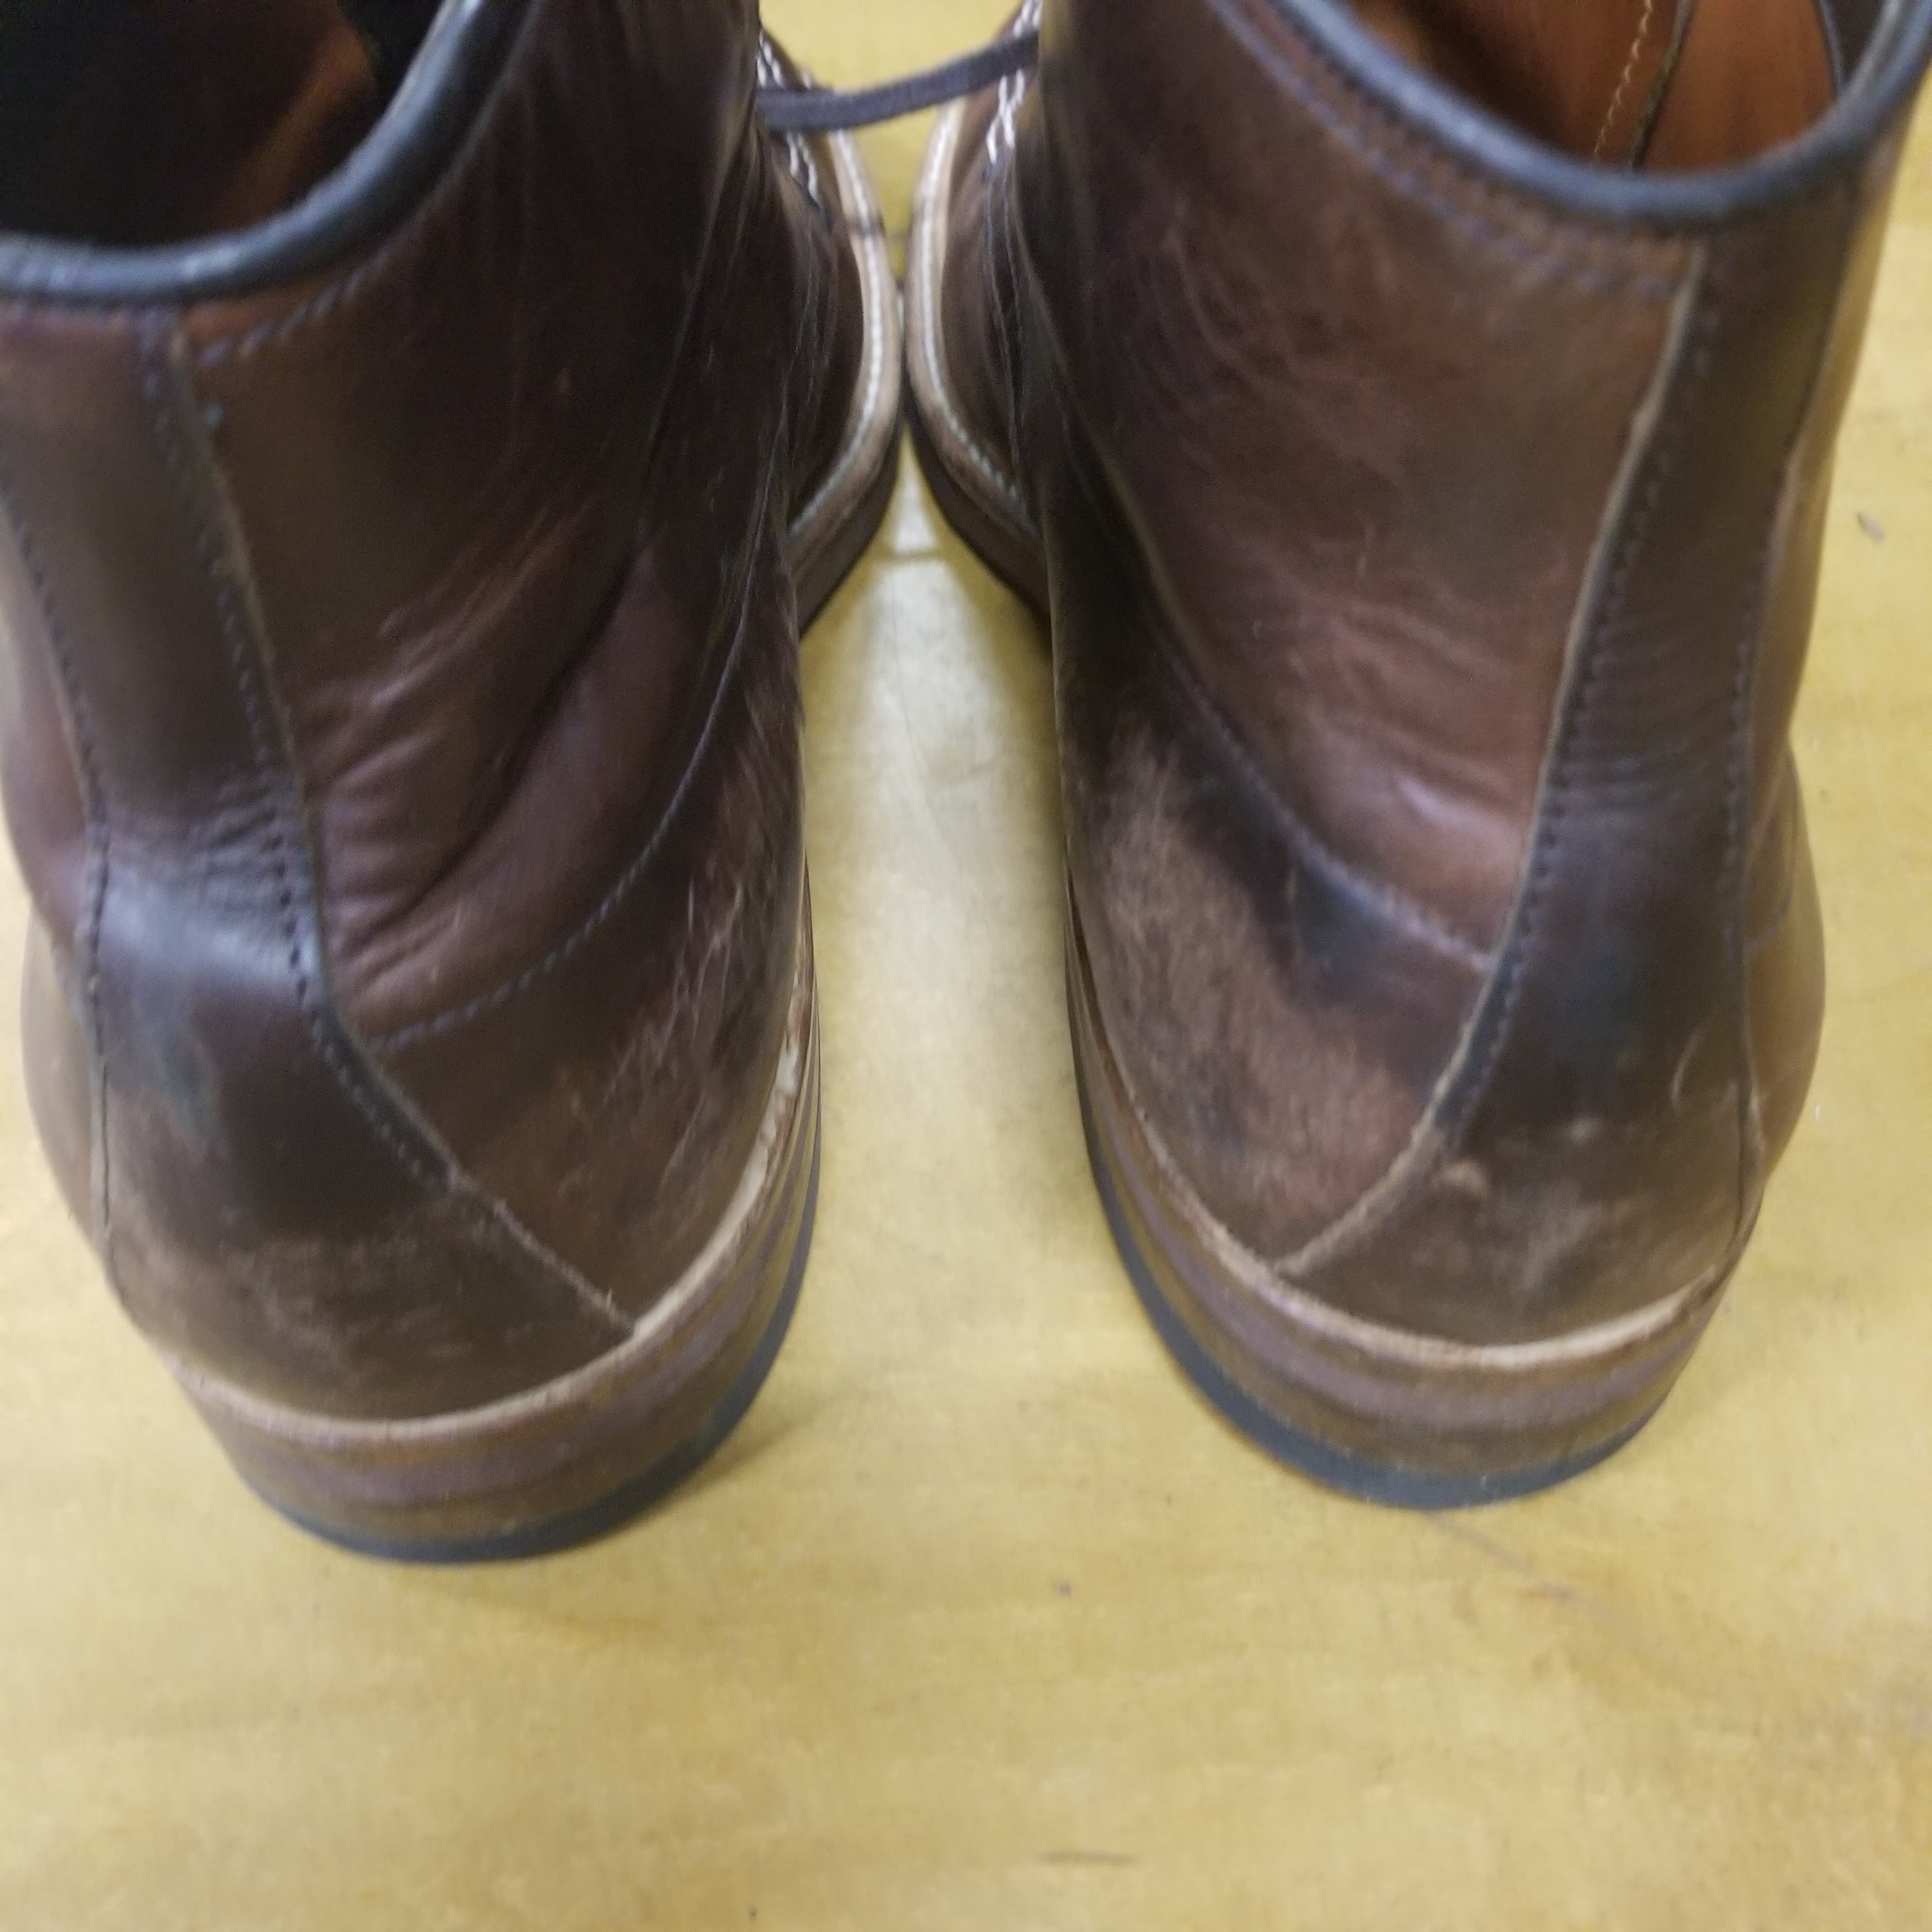 Ed's Workbench: Cleaning Up Some Indy Boots - The Shoe Mart